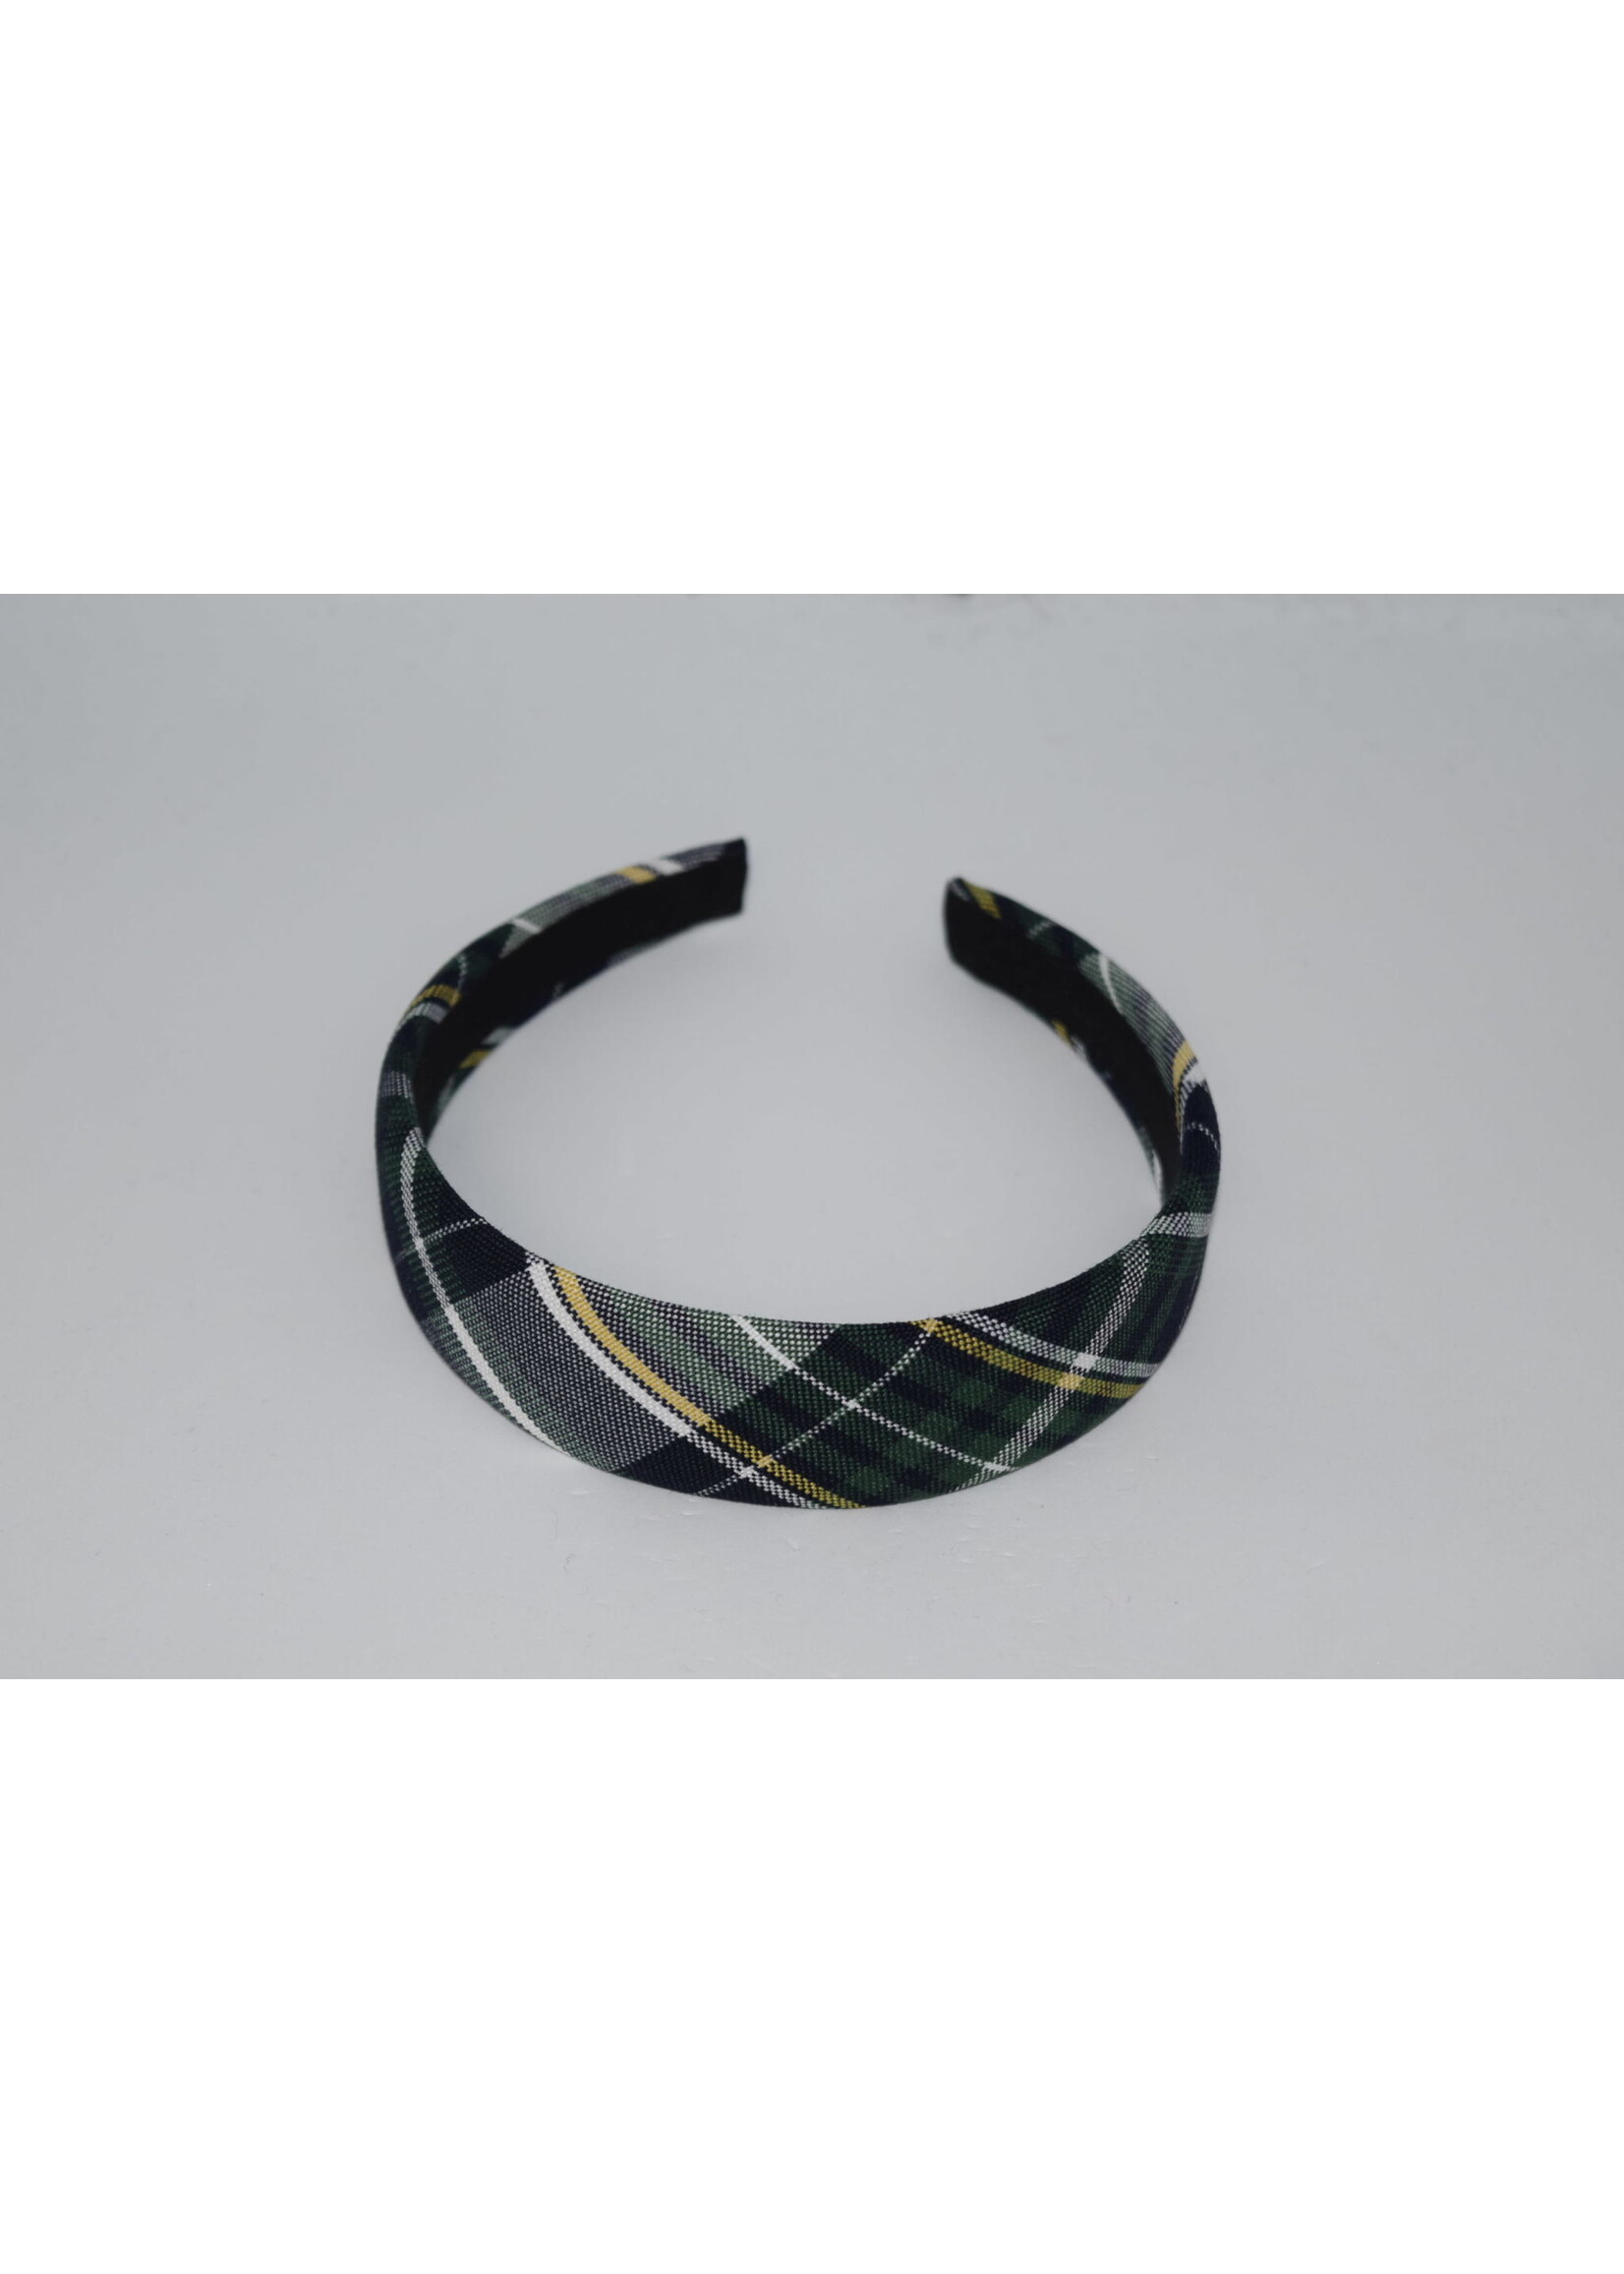 Wide padded headband w/out metal tips P1B